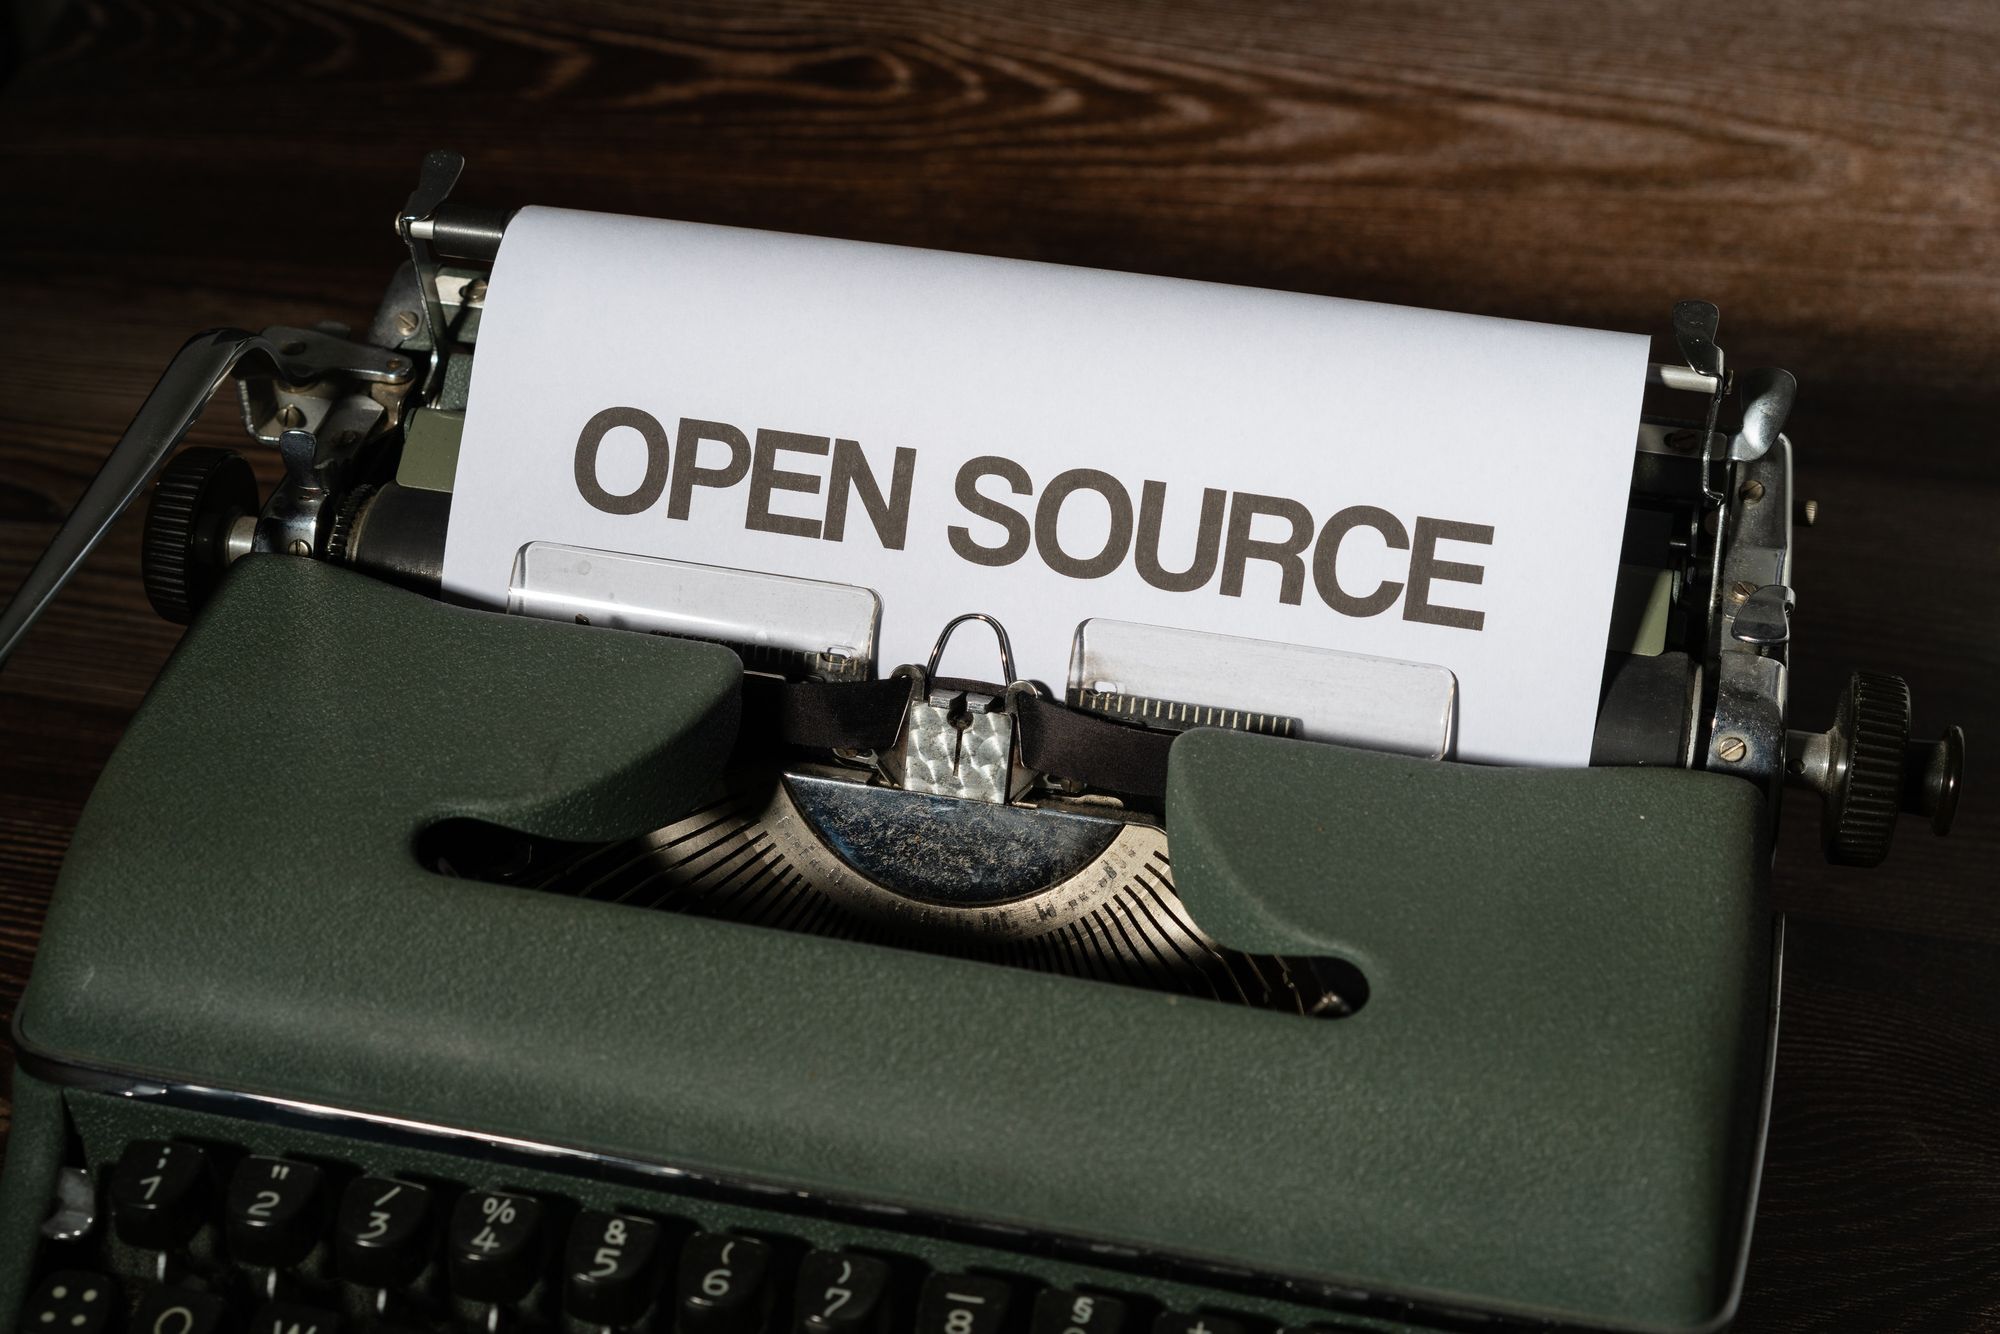 A Brief History of Open Source